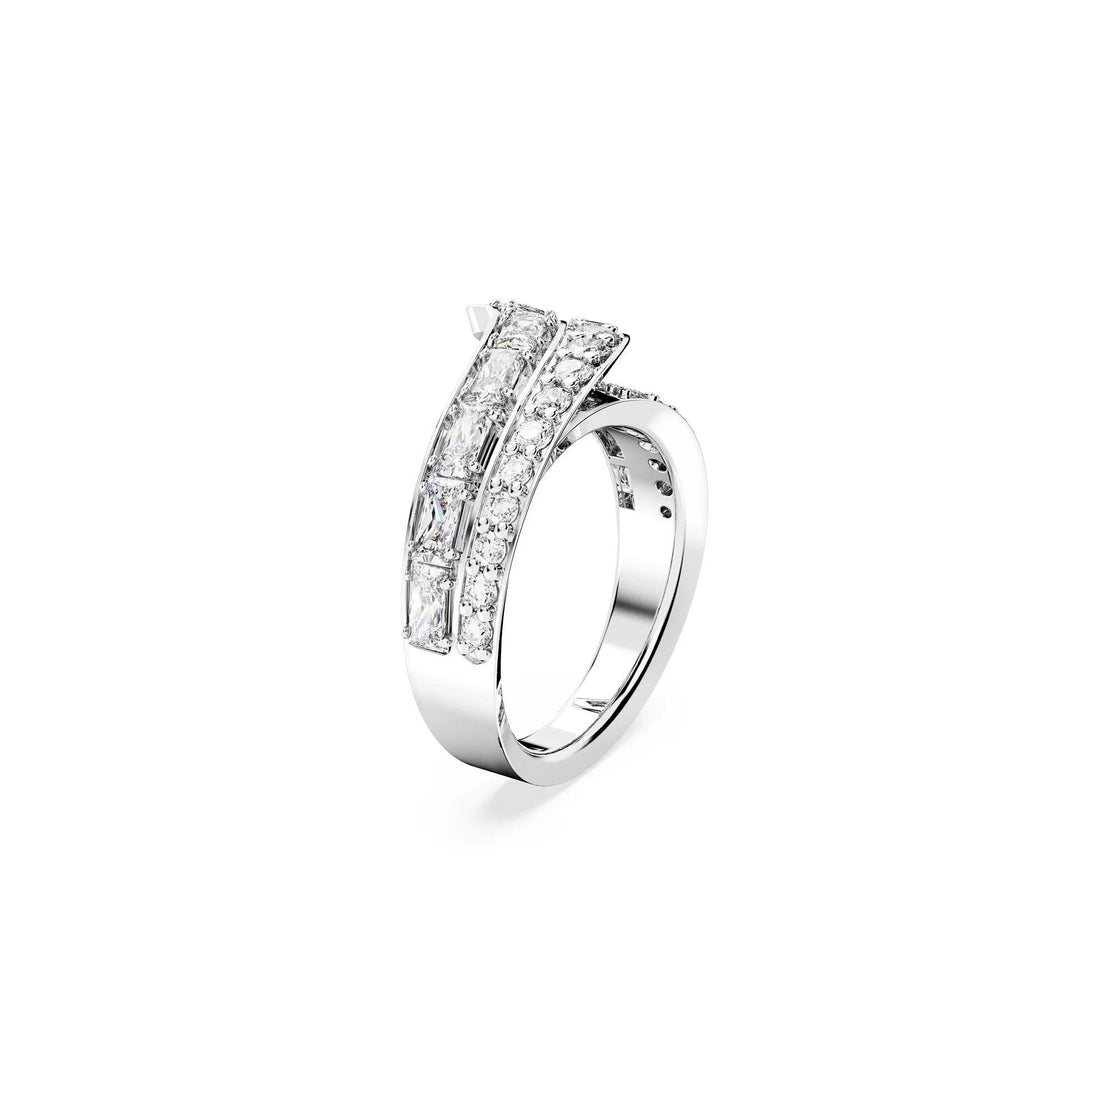 Hyperbola cocktail ring, Carbon neutral zirconia, Mixed cuts, Double bands, White, Rhodium plated 58 SWRK05665347